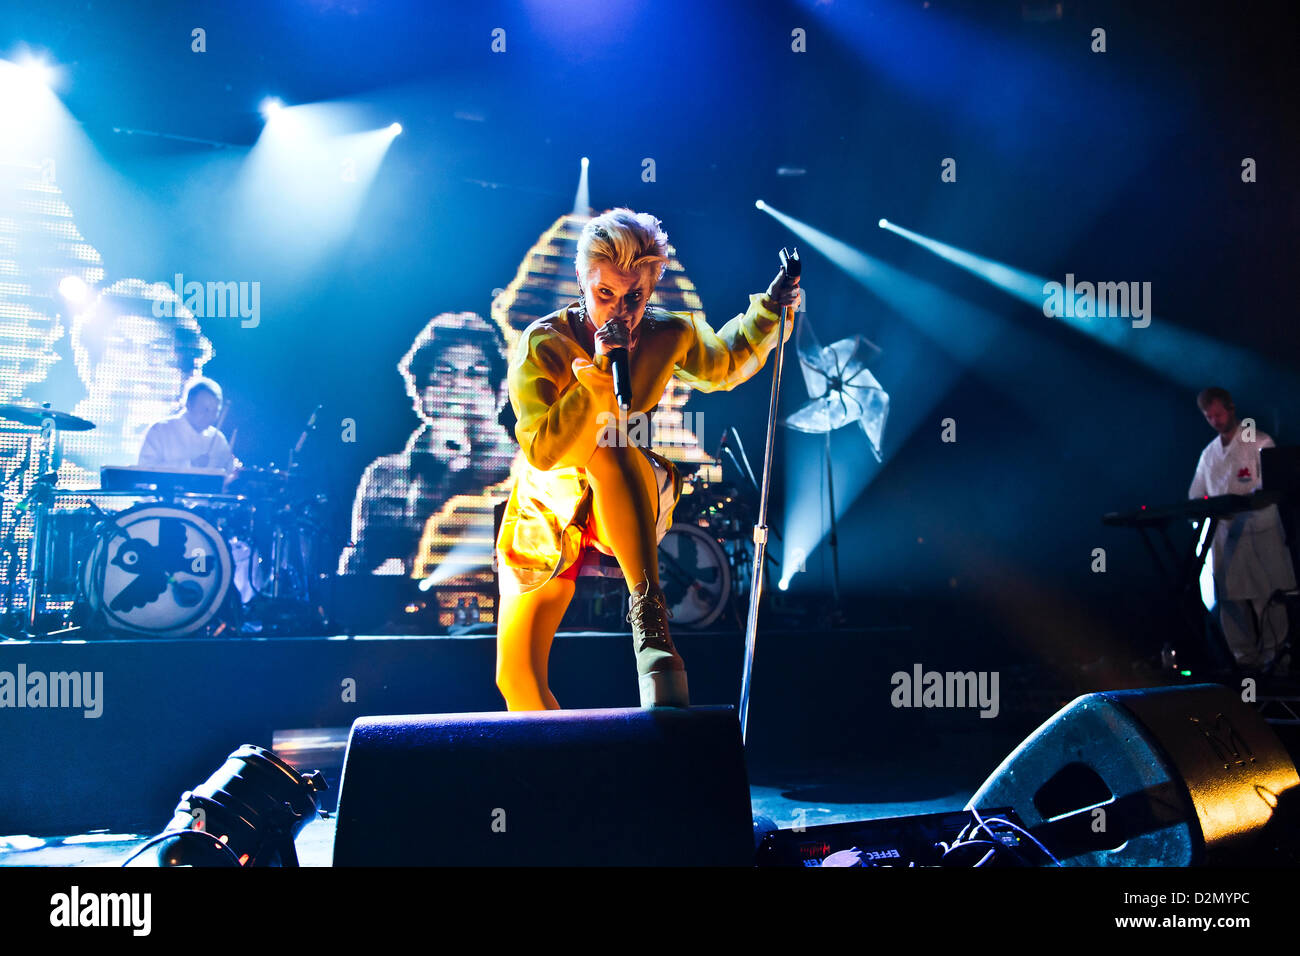 Robyn photographed at Brixton Academy in London, United Kingdom on 1 November 2012. Photo by: Carsten Windhorst Stock Photo